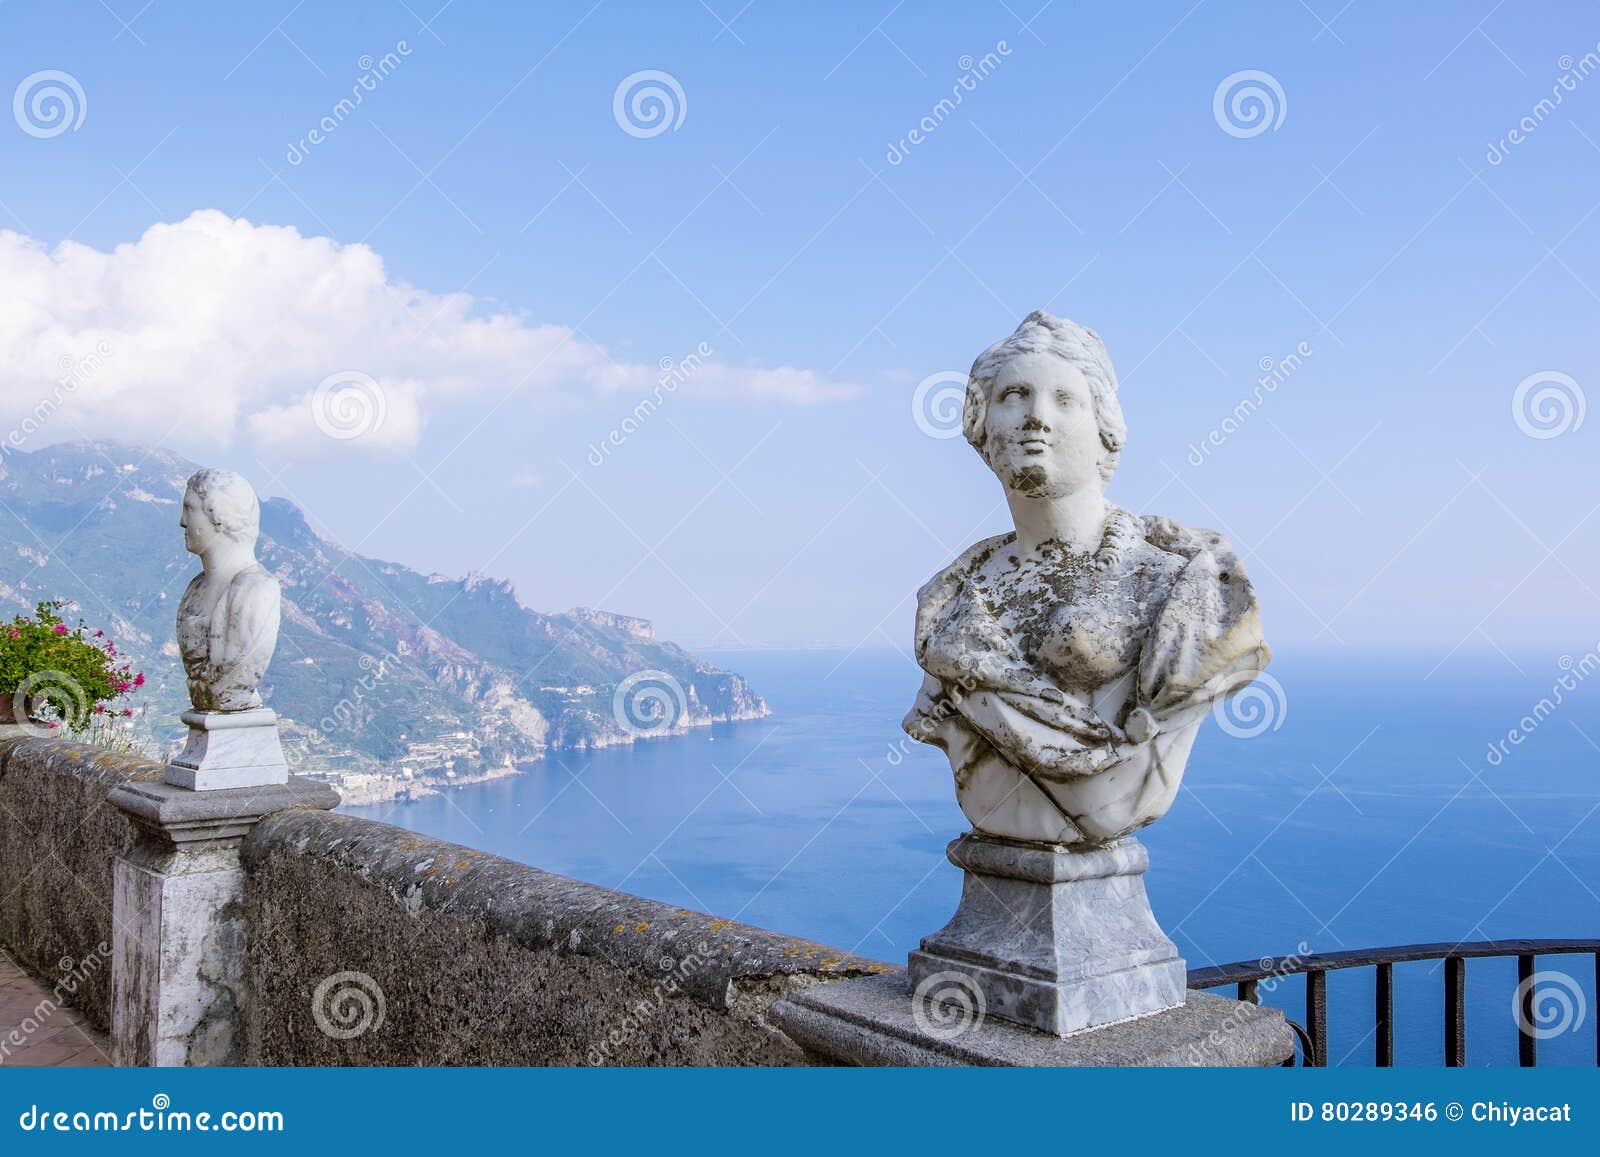 statues along the terrace of infinity in ravello